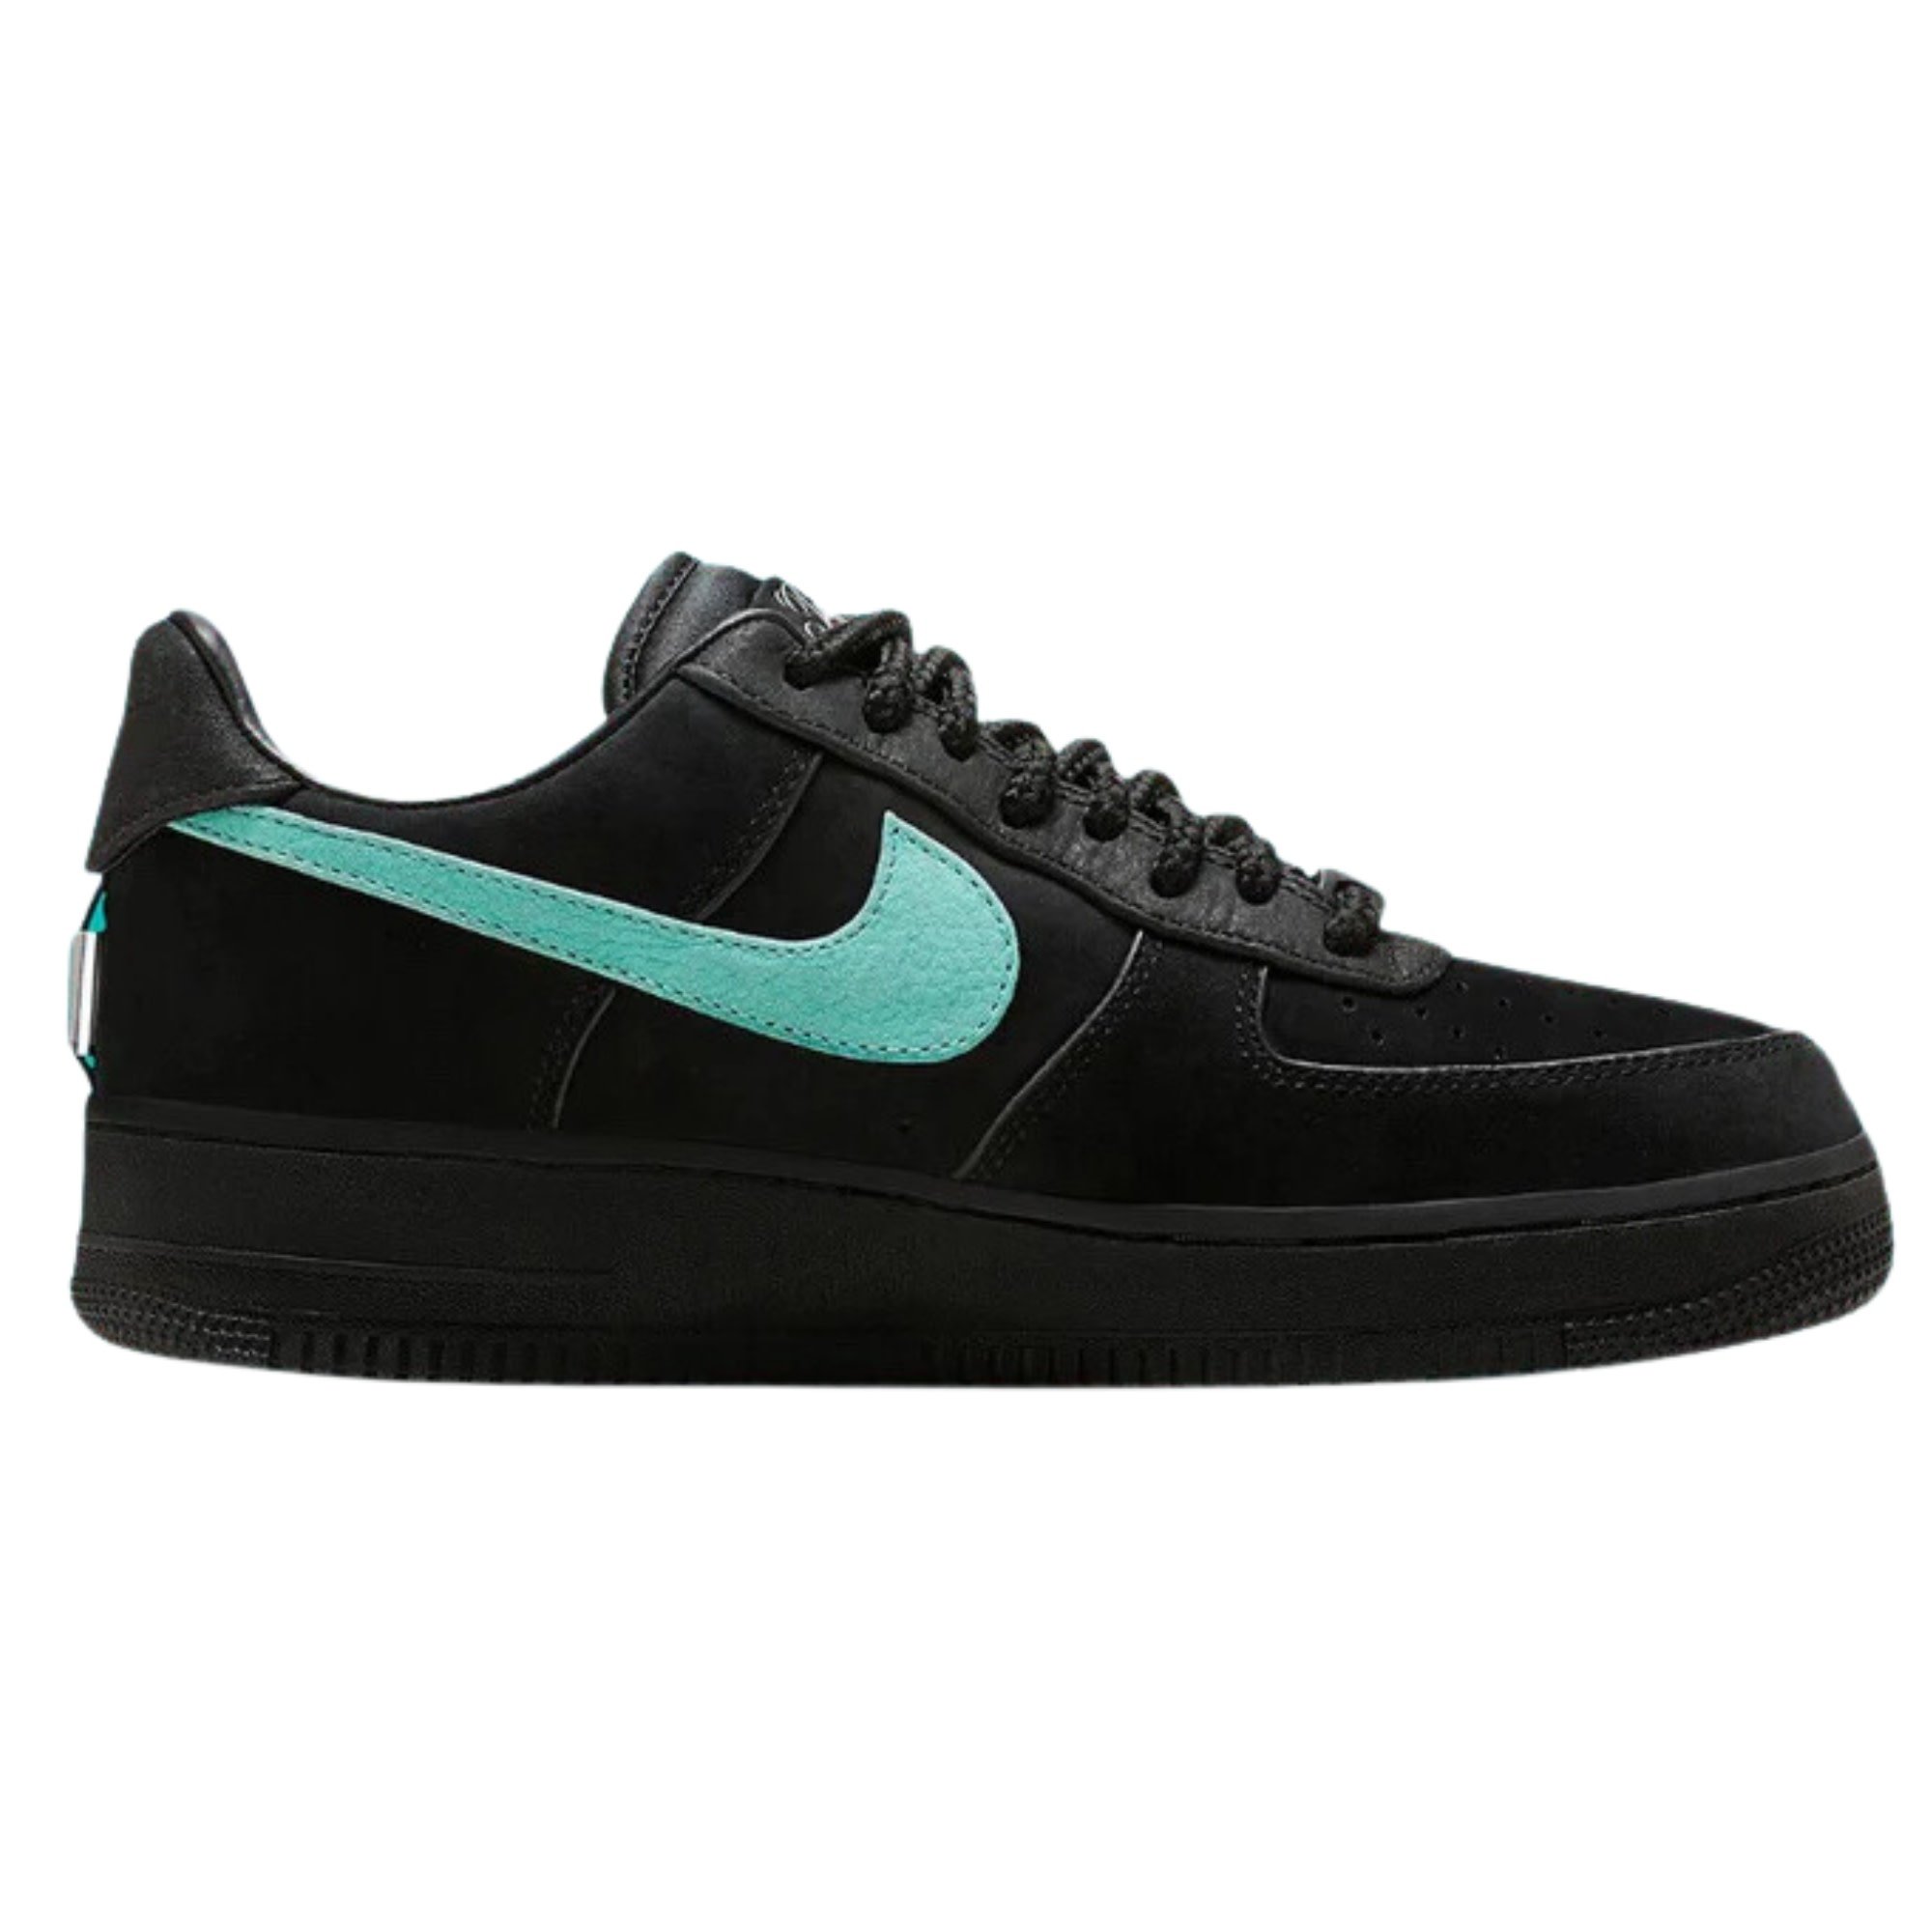 NIKE X TIFFANY & CO. AIR FORCE 1 LOW 183 SNEAKERS (US 10)